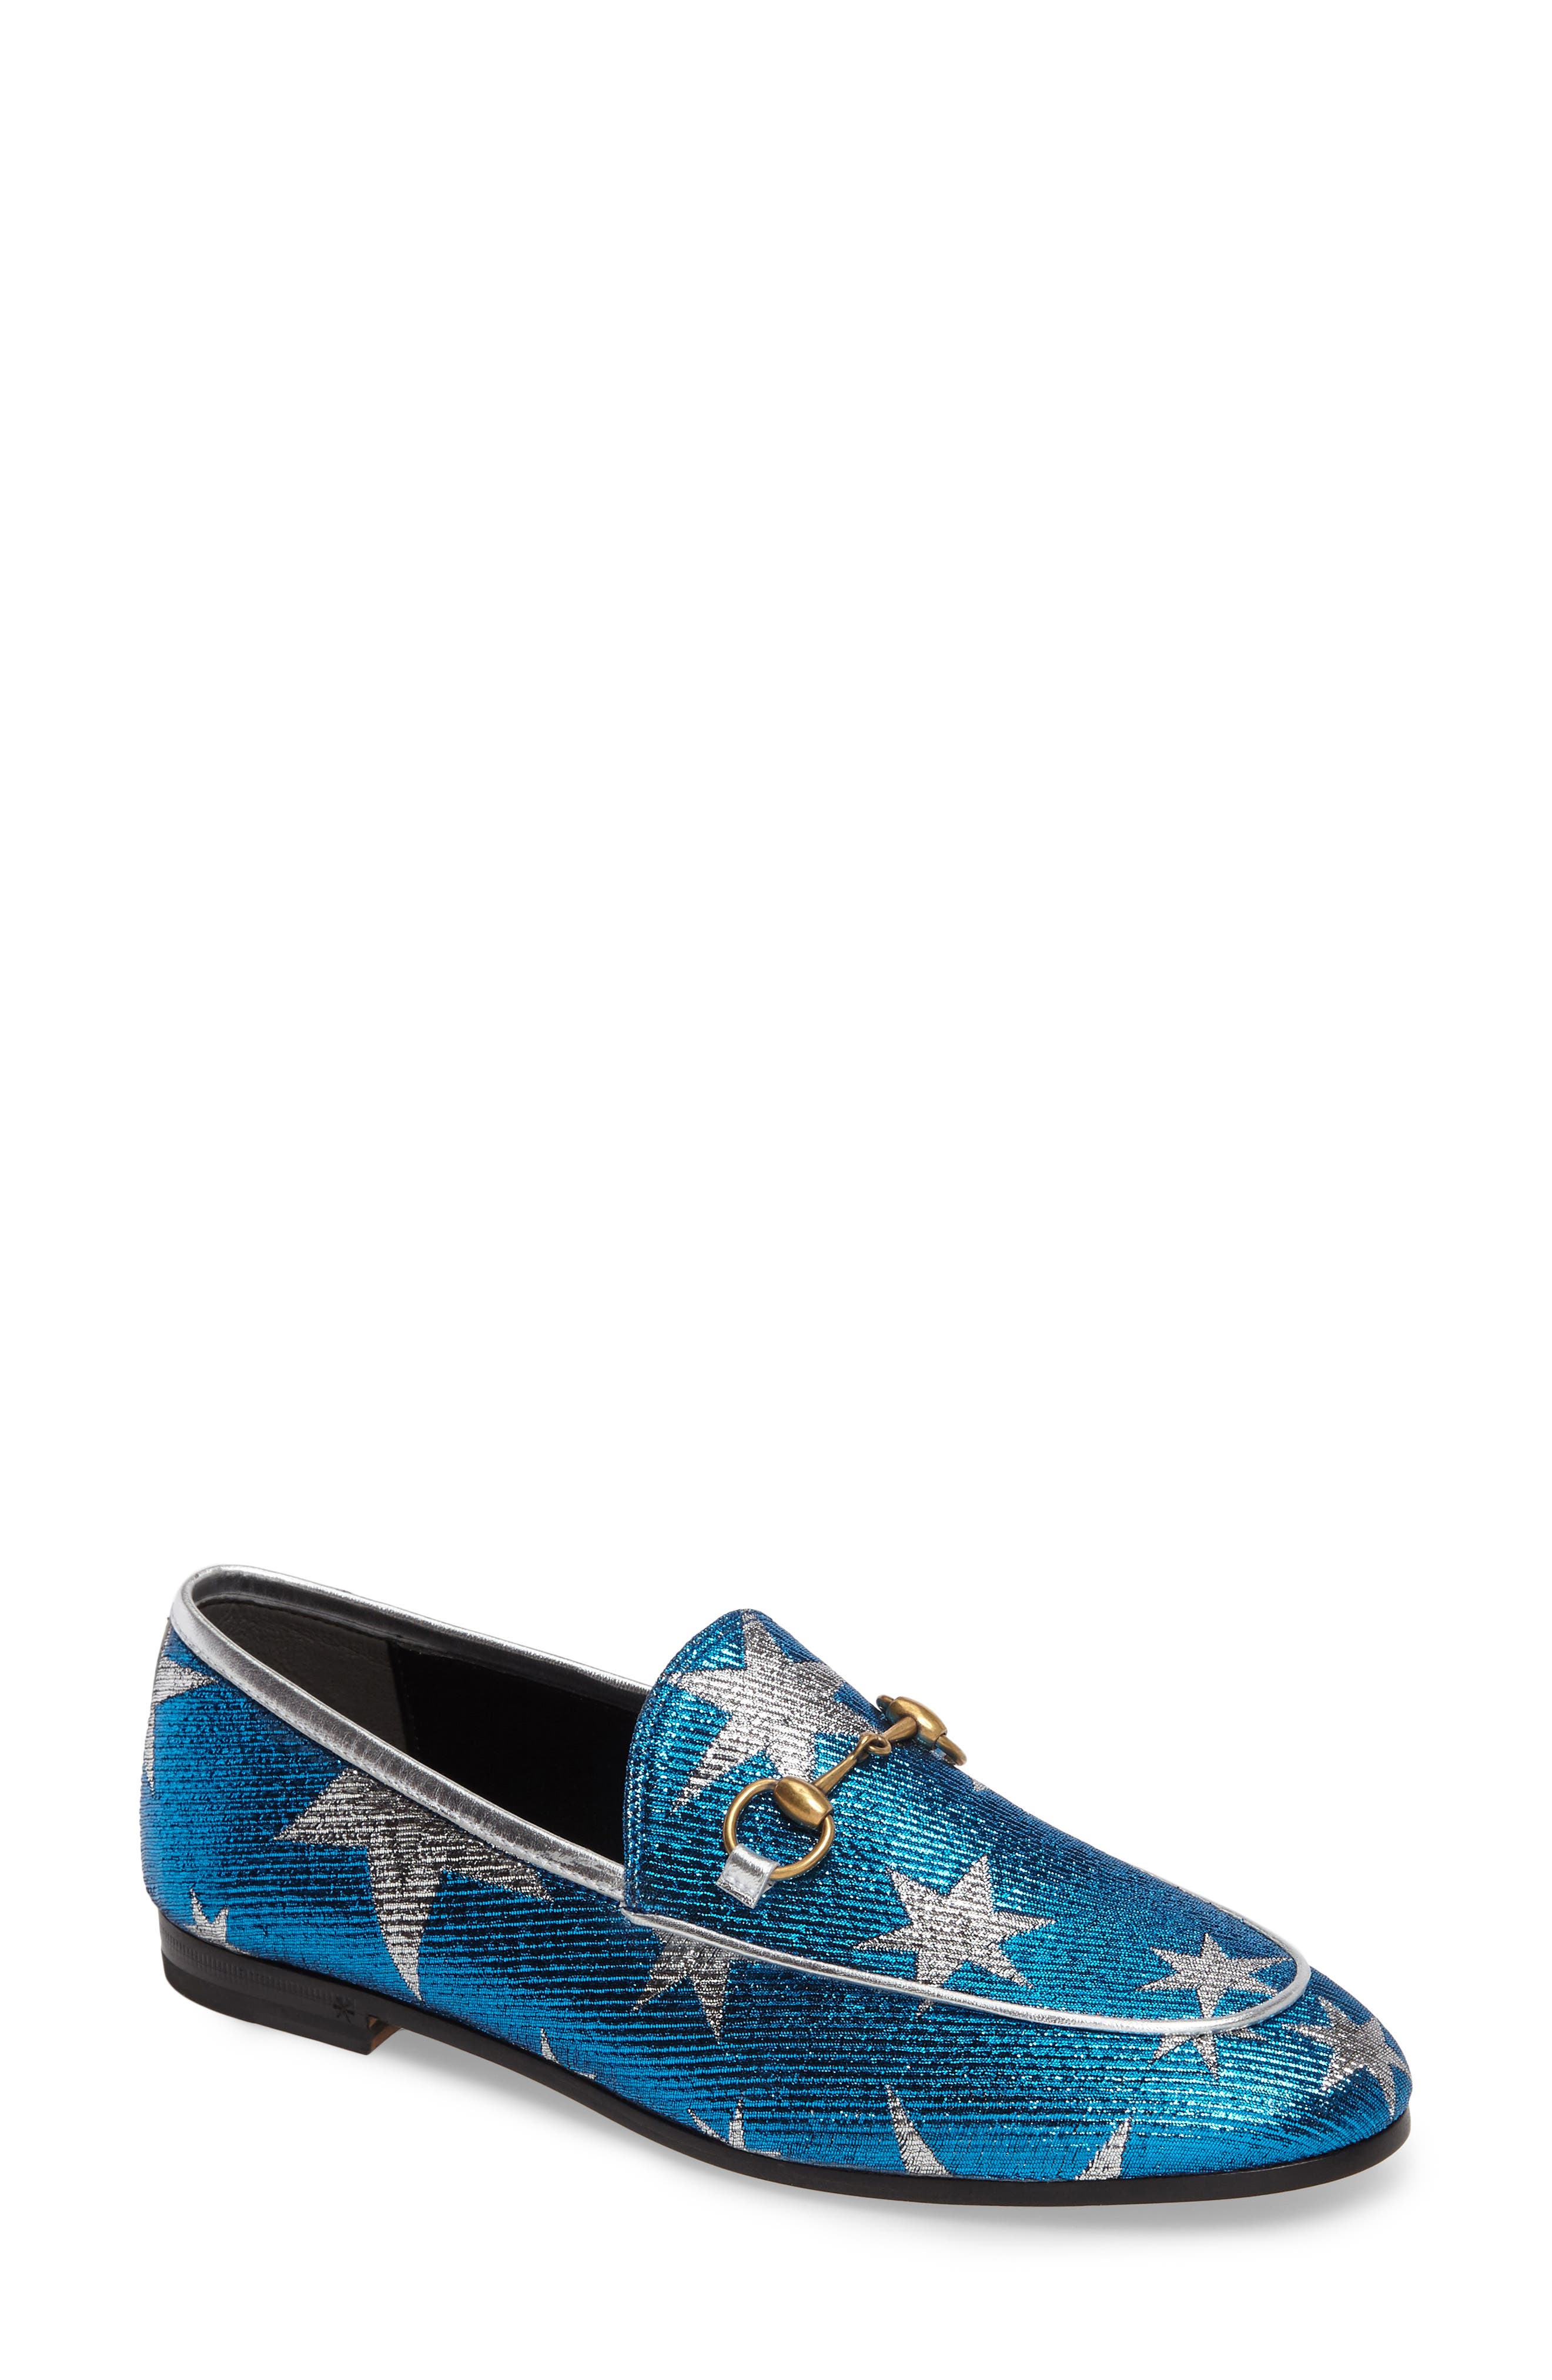 gucci loafers with stars